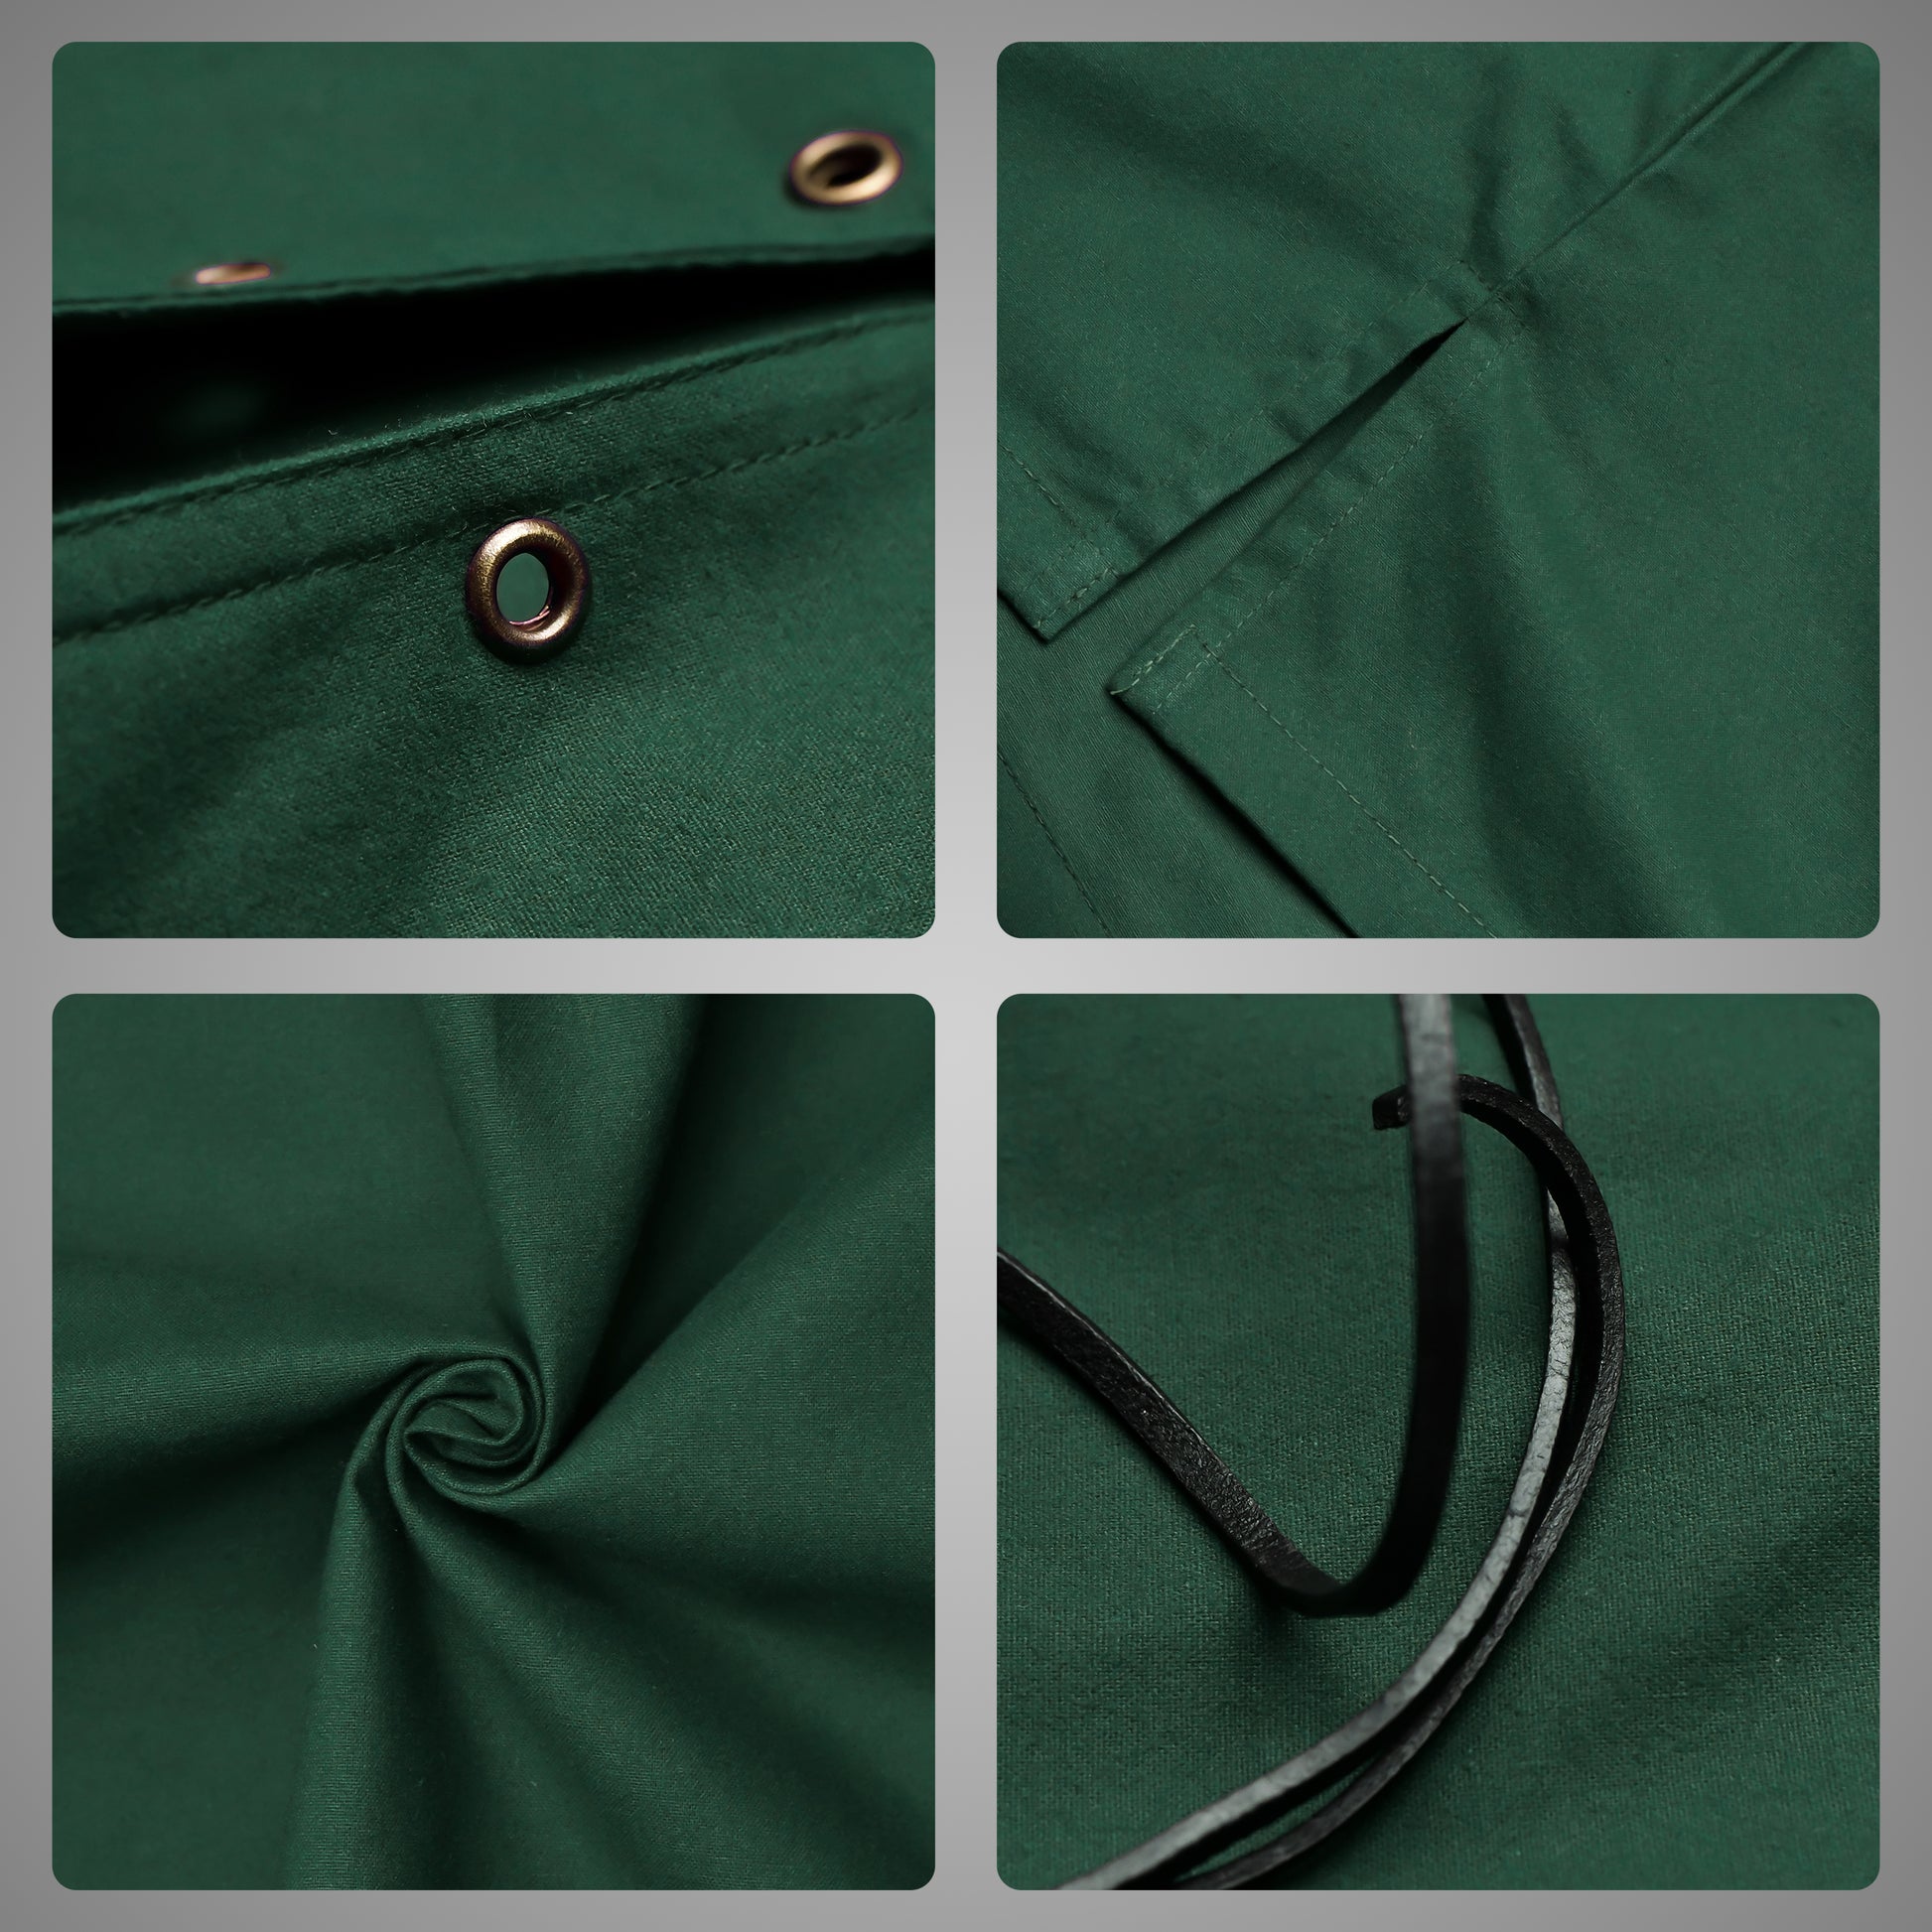 Highland Green Kilt Shirt, made from high-quality fabric, ideal for formal and casual Scottish attire.